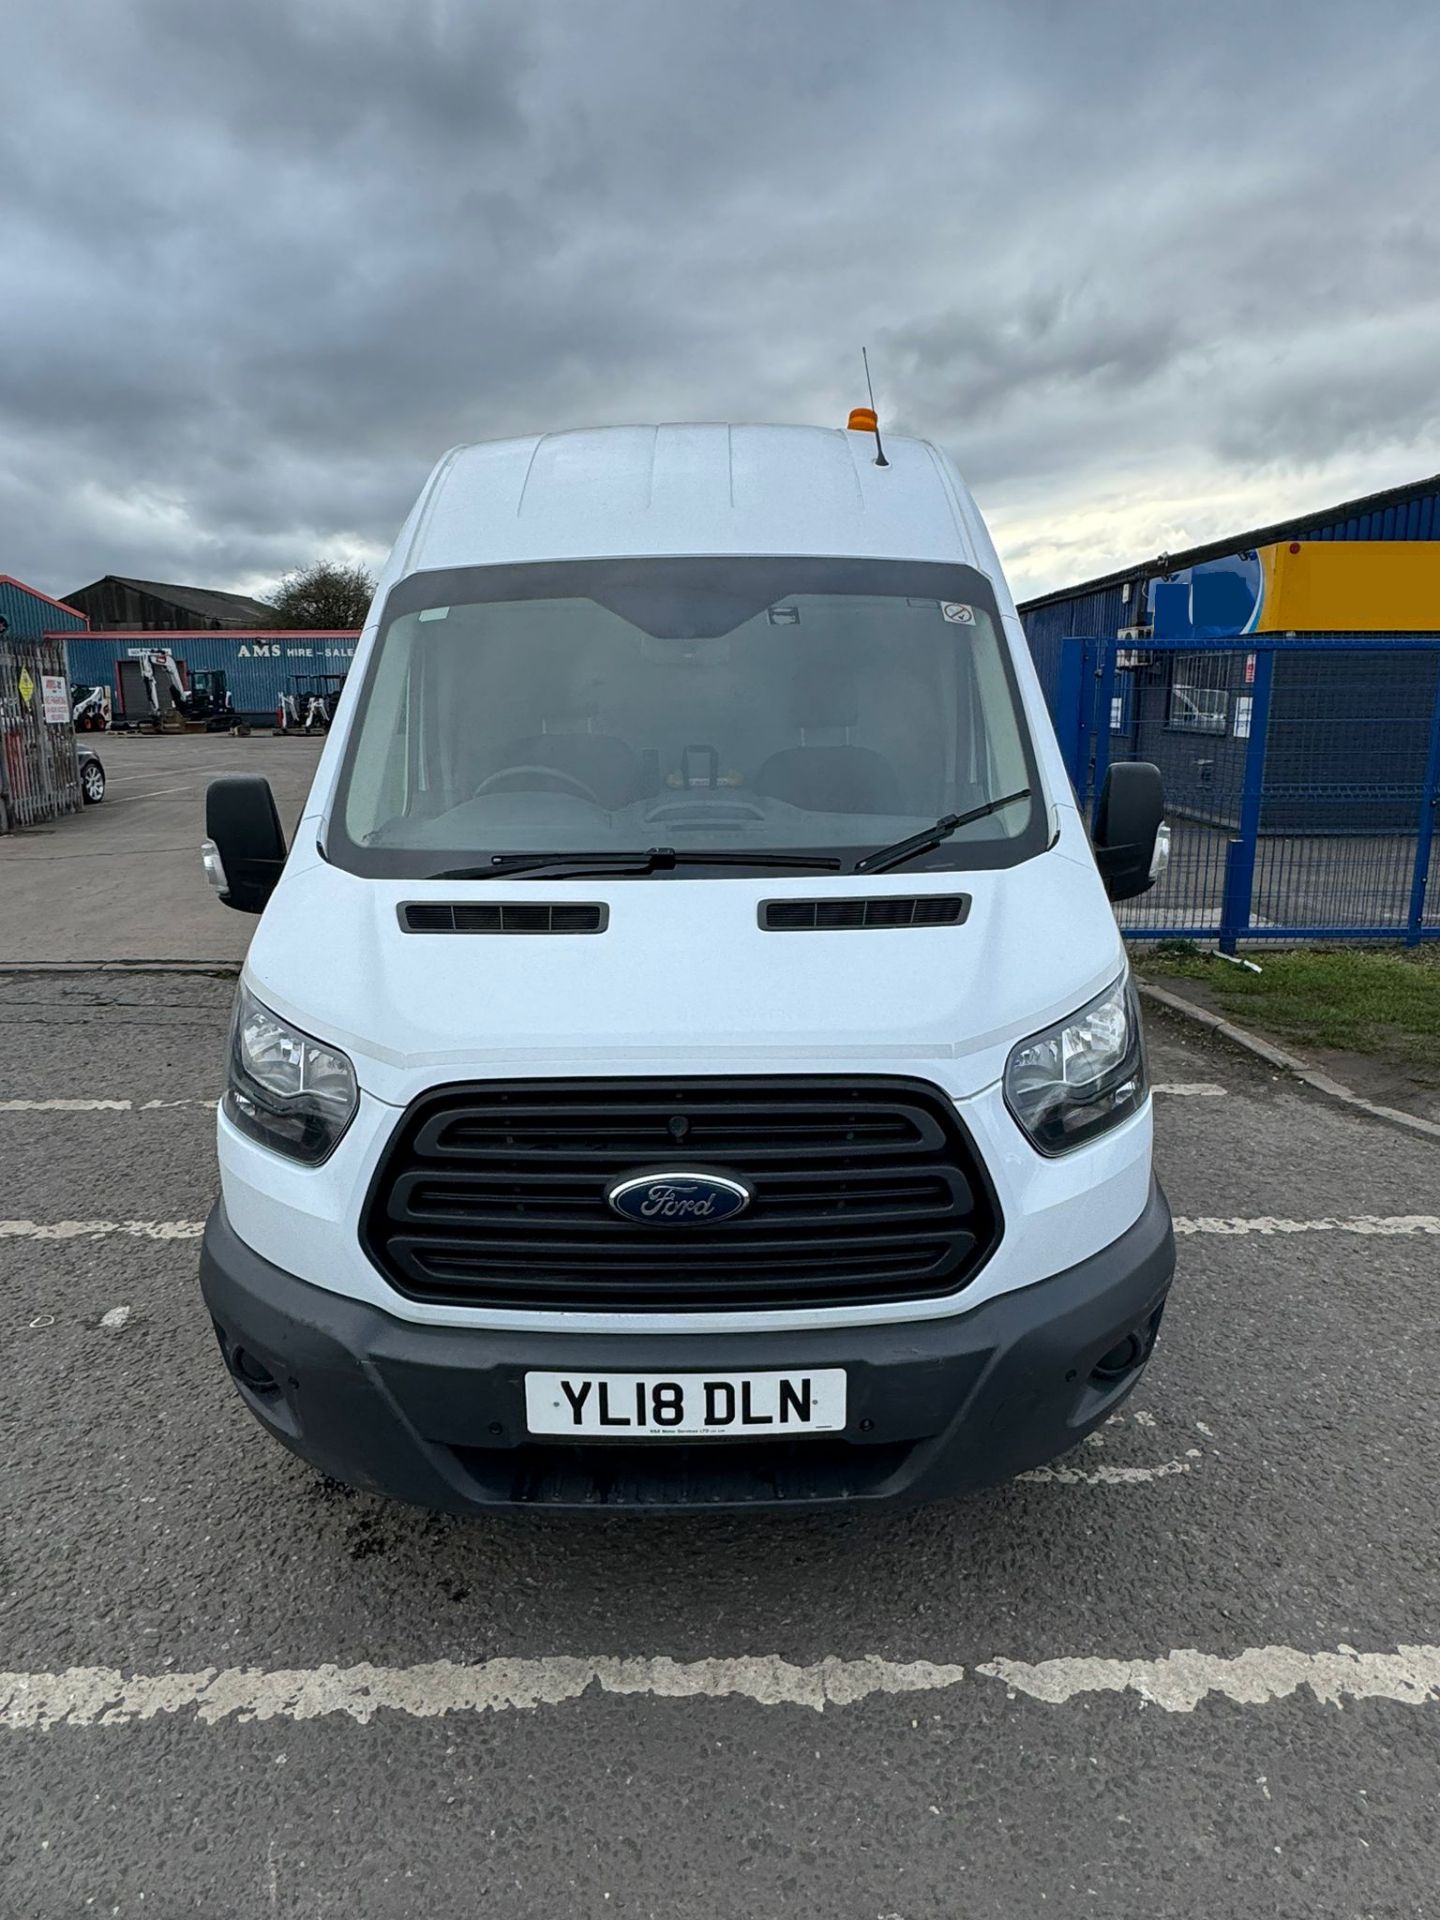 2018 18 FORD TRANSIT 350 PANEL VAN - 114K MILES - L2 H3 FWD - AIR CON - IDEAL CAMPER CONVERSION - Image 2 of 14